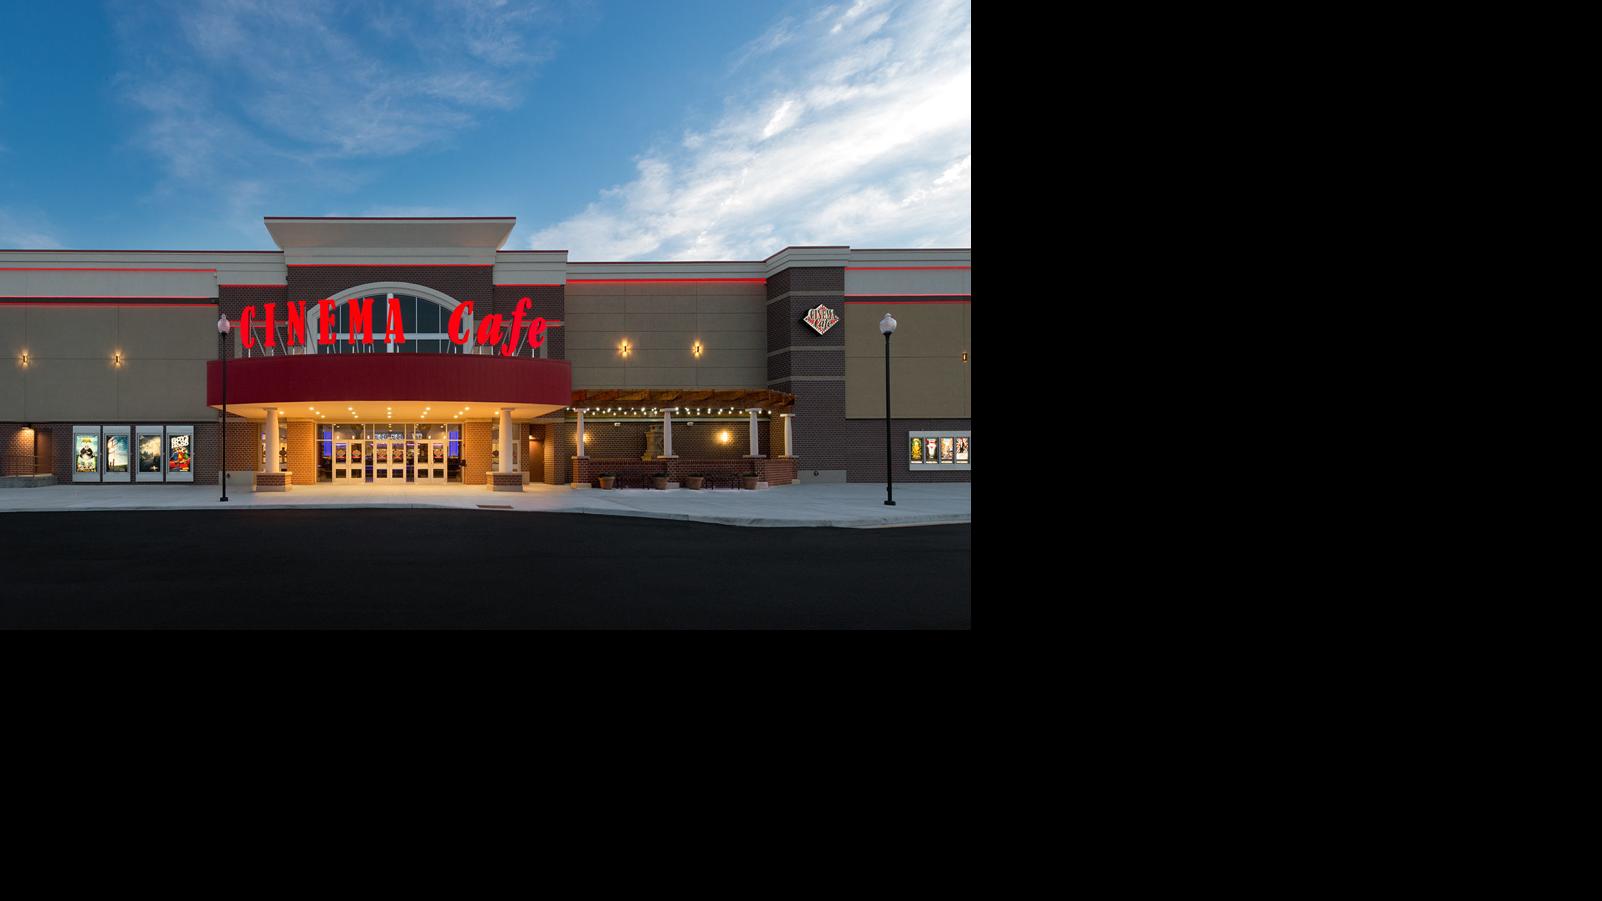 New dine-in movie theater complex to open in Chester in ...